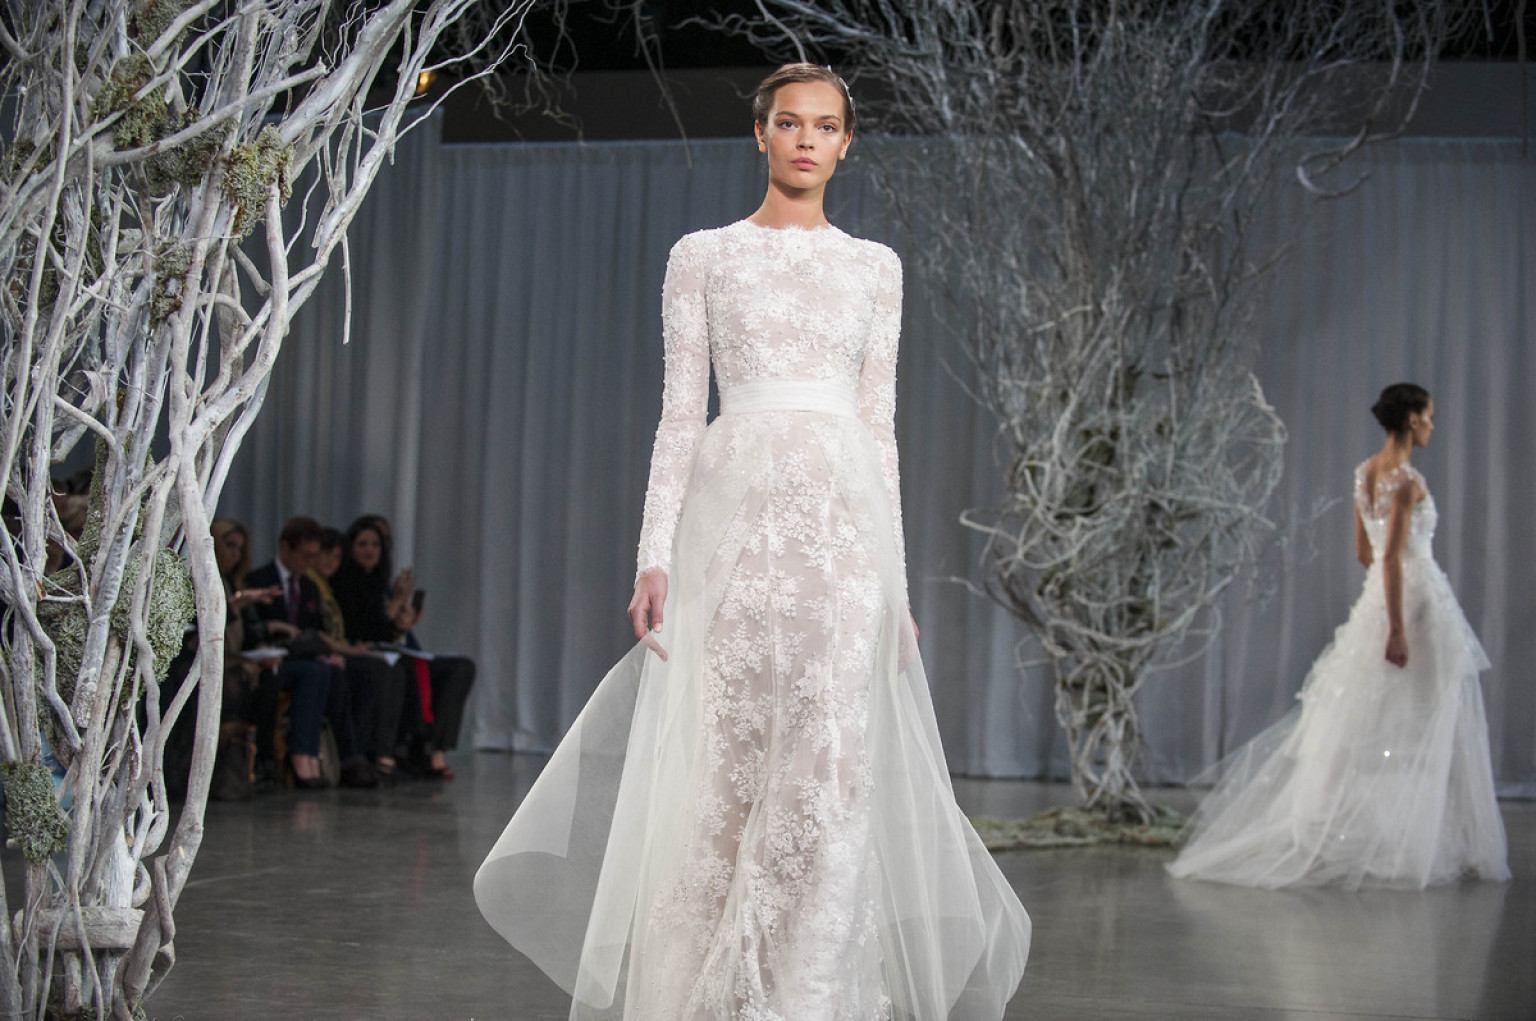 Wedding Dress Trends For 2013 Revealed By Randy Fenoli Of Say Yes To